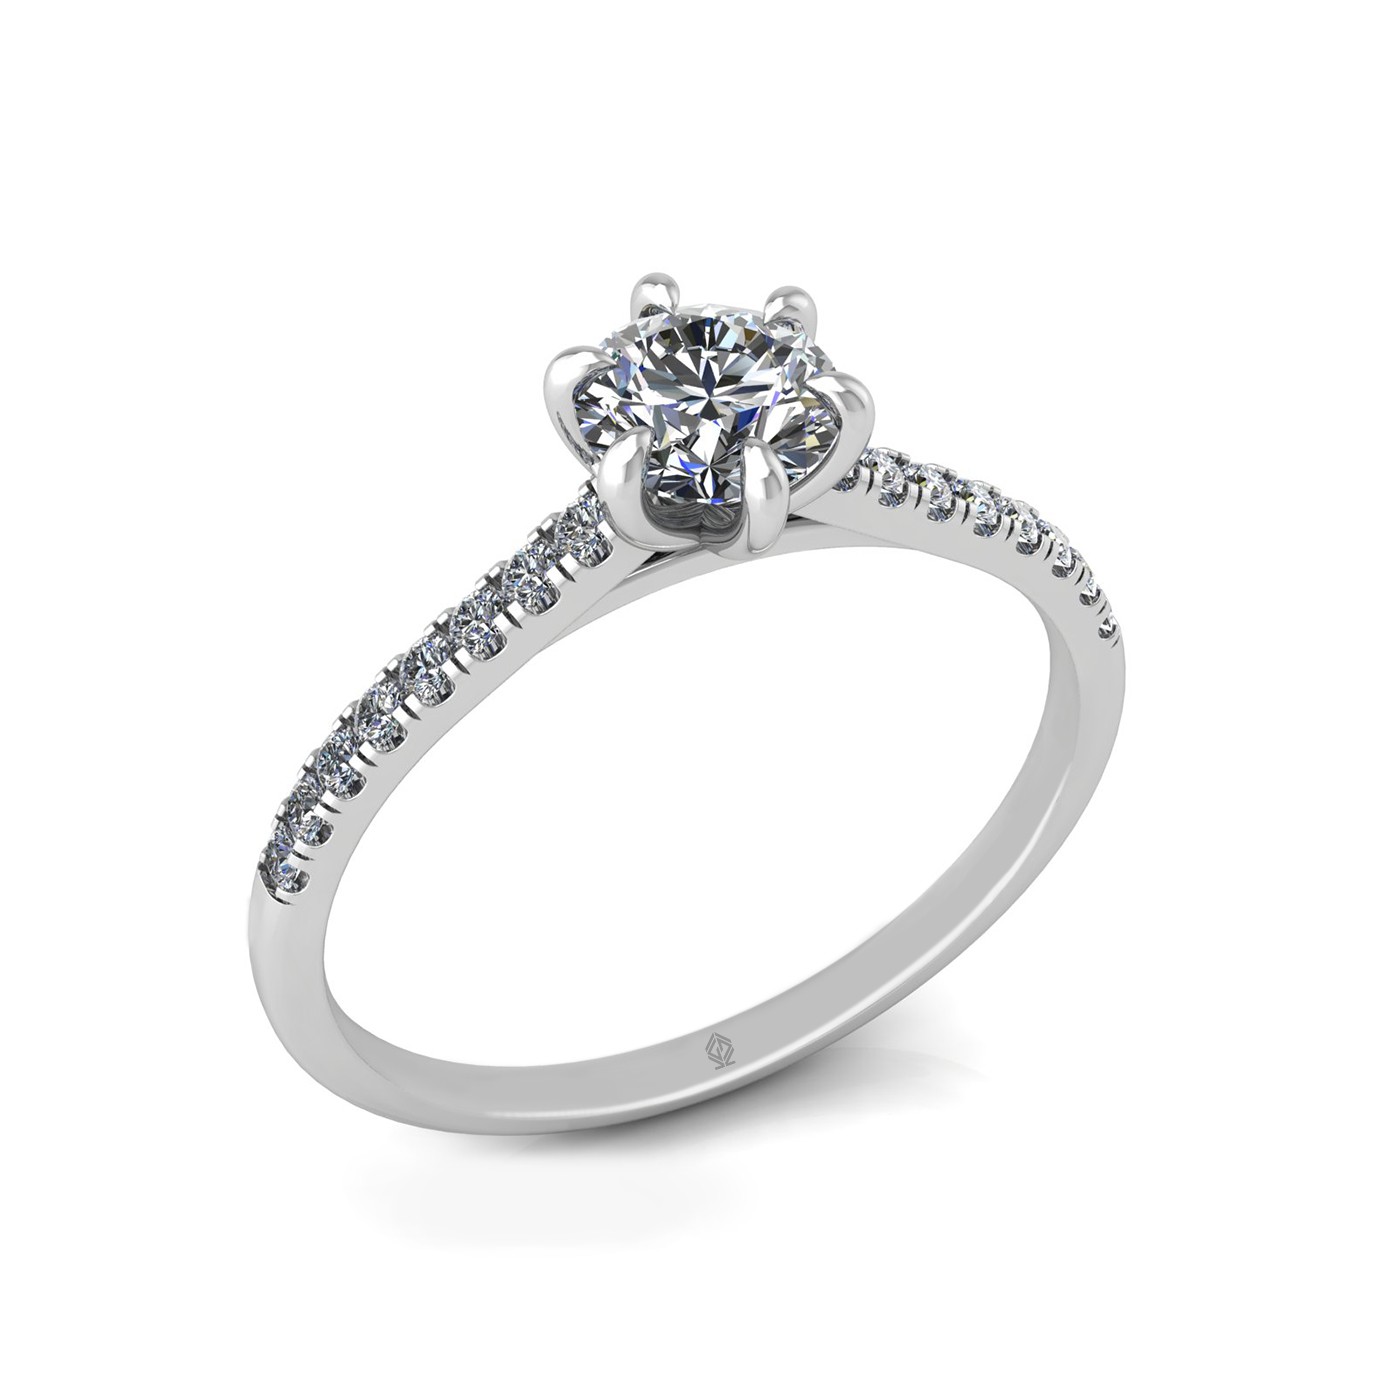 18k white gold 0,50 ct 6 prongs round cut diamond engagement ring with whisper thin pavÉ set band